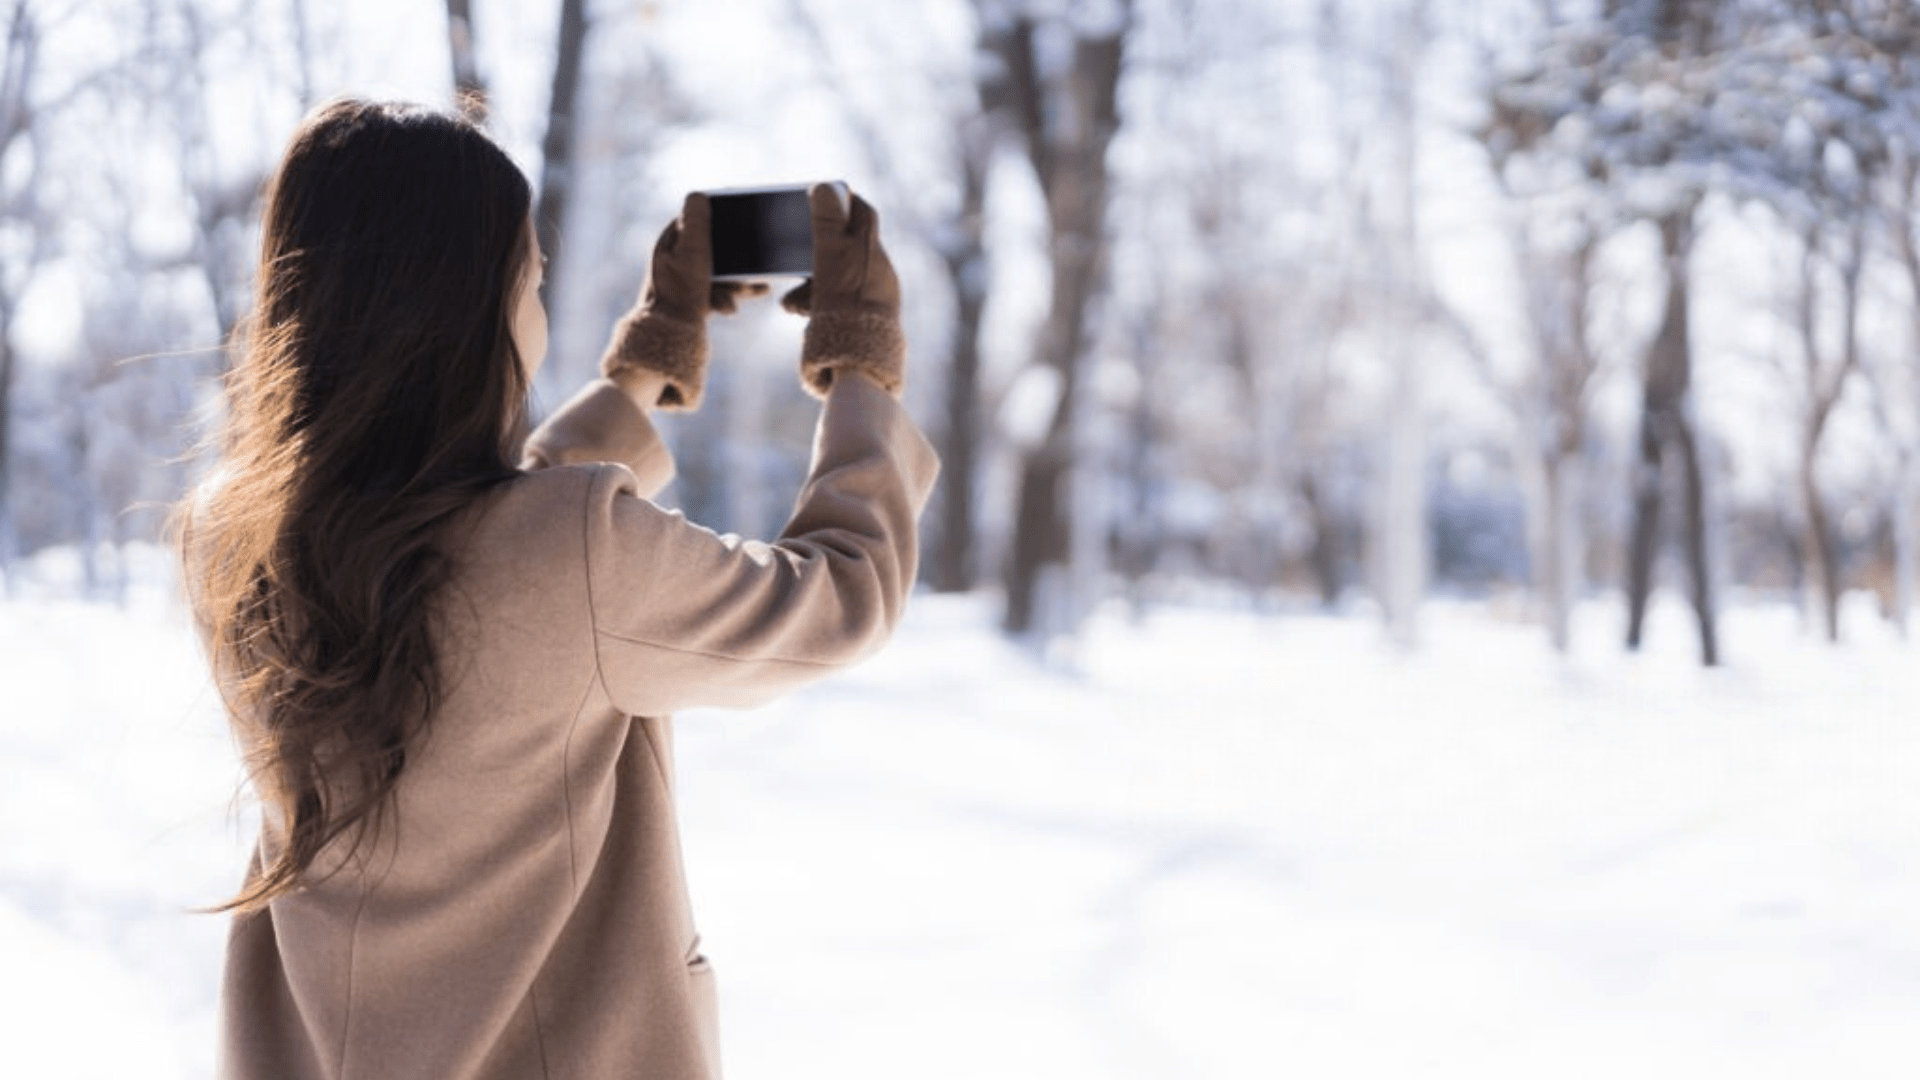 Woman taking a photo on her smartphone of a snowy parking lot